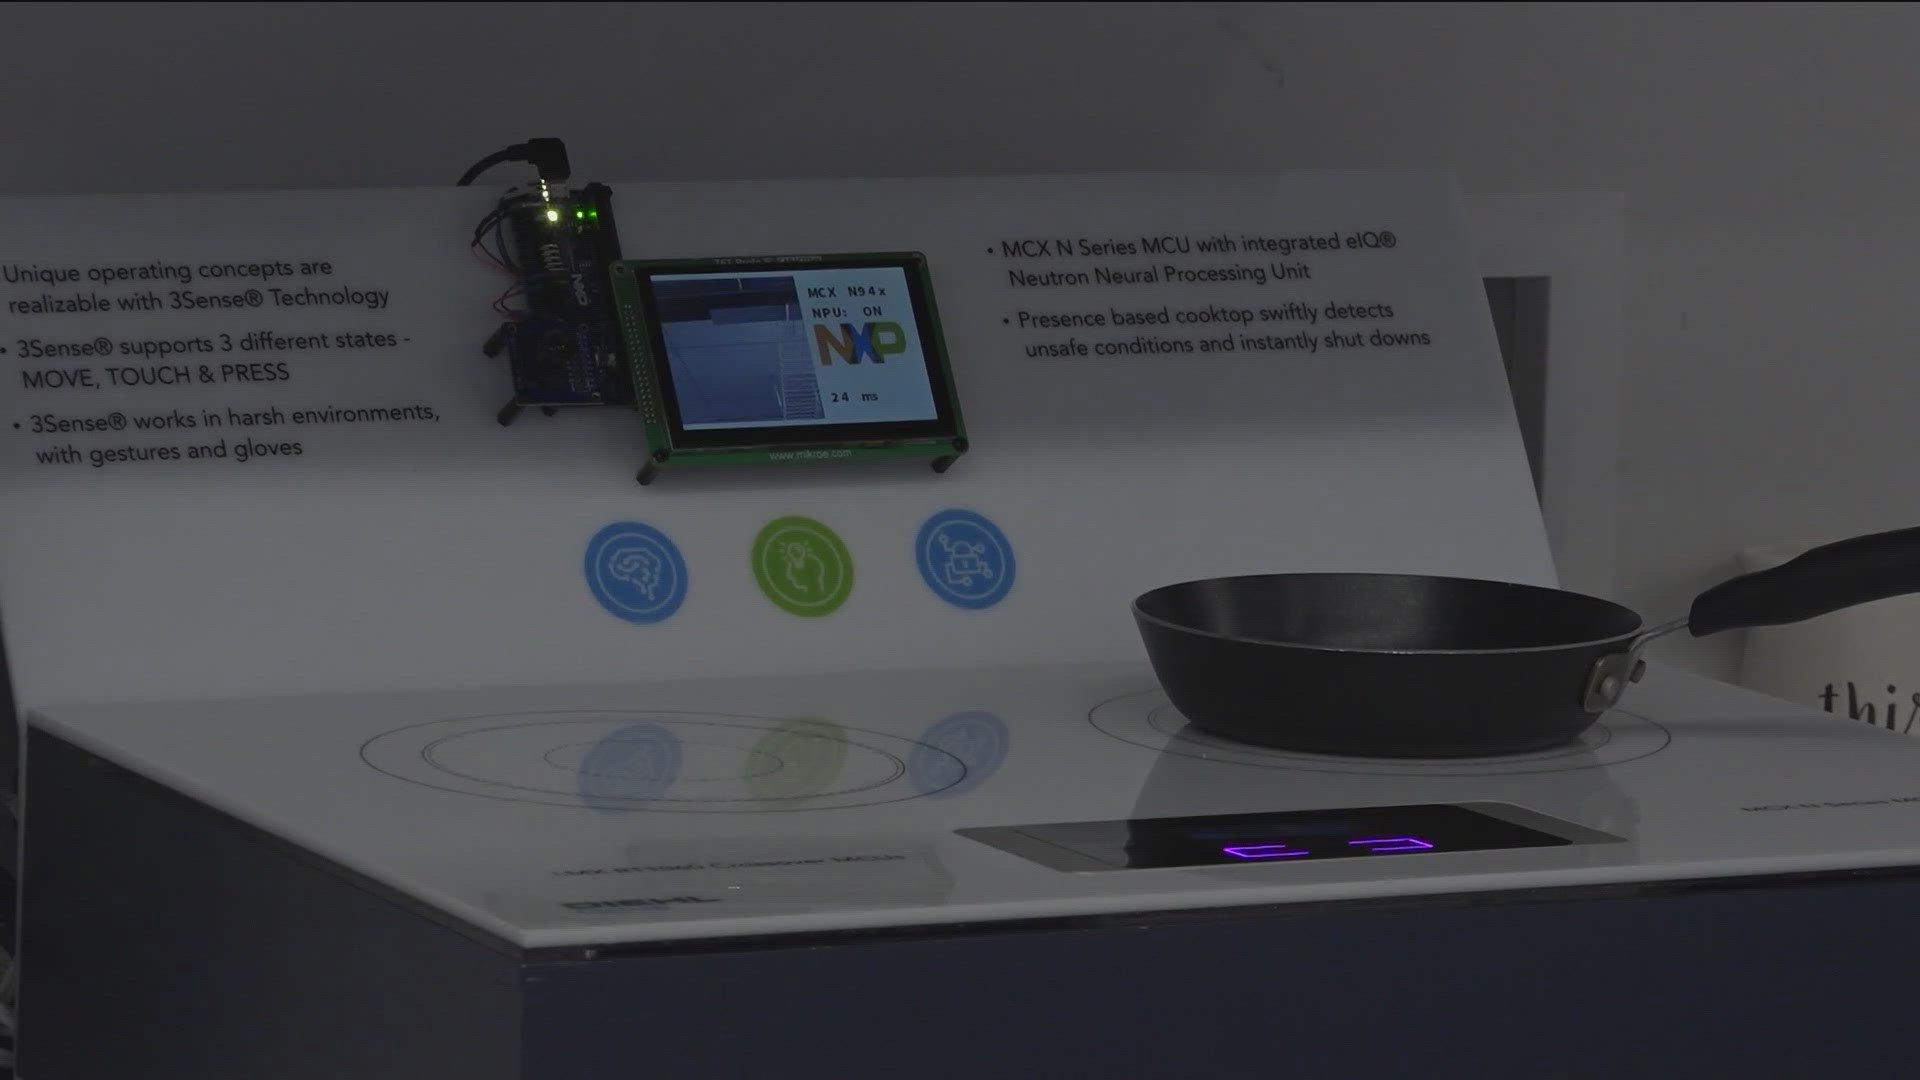 Some of the work to make smart home technology is happening in Austin. KVUE's Matt Fernandez takes us inside NXP's new Smart Home Innovation Lab.